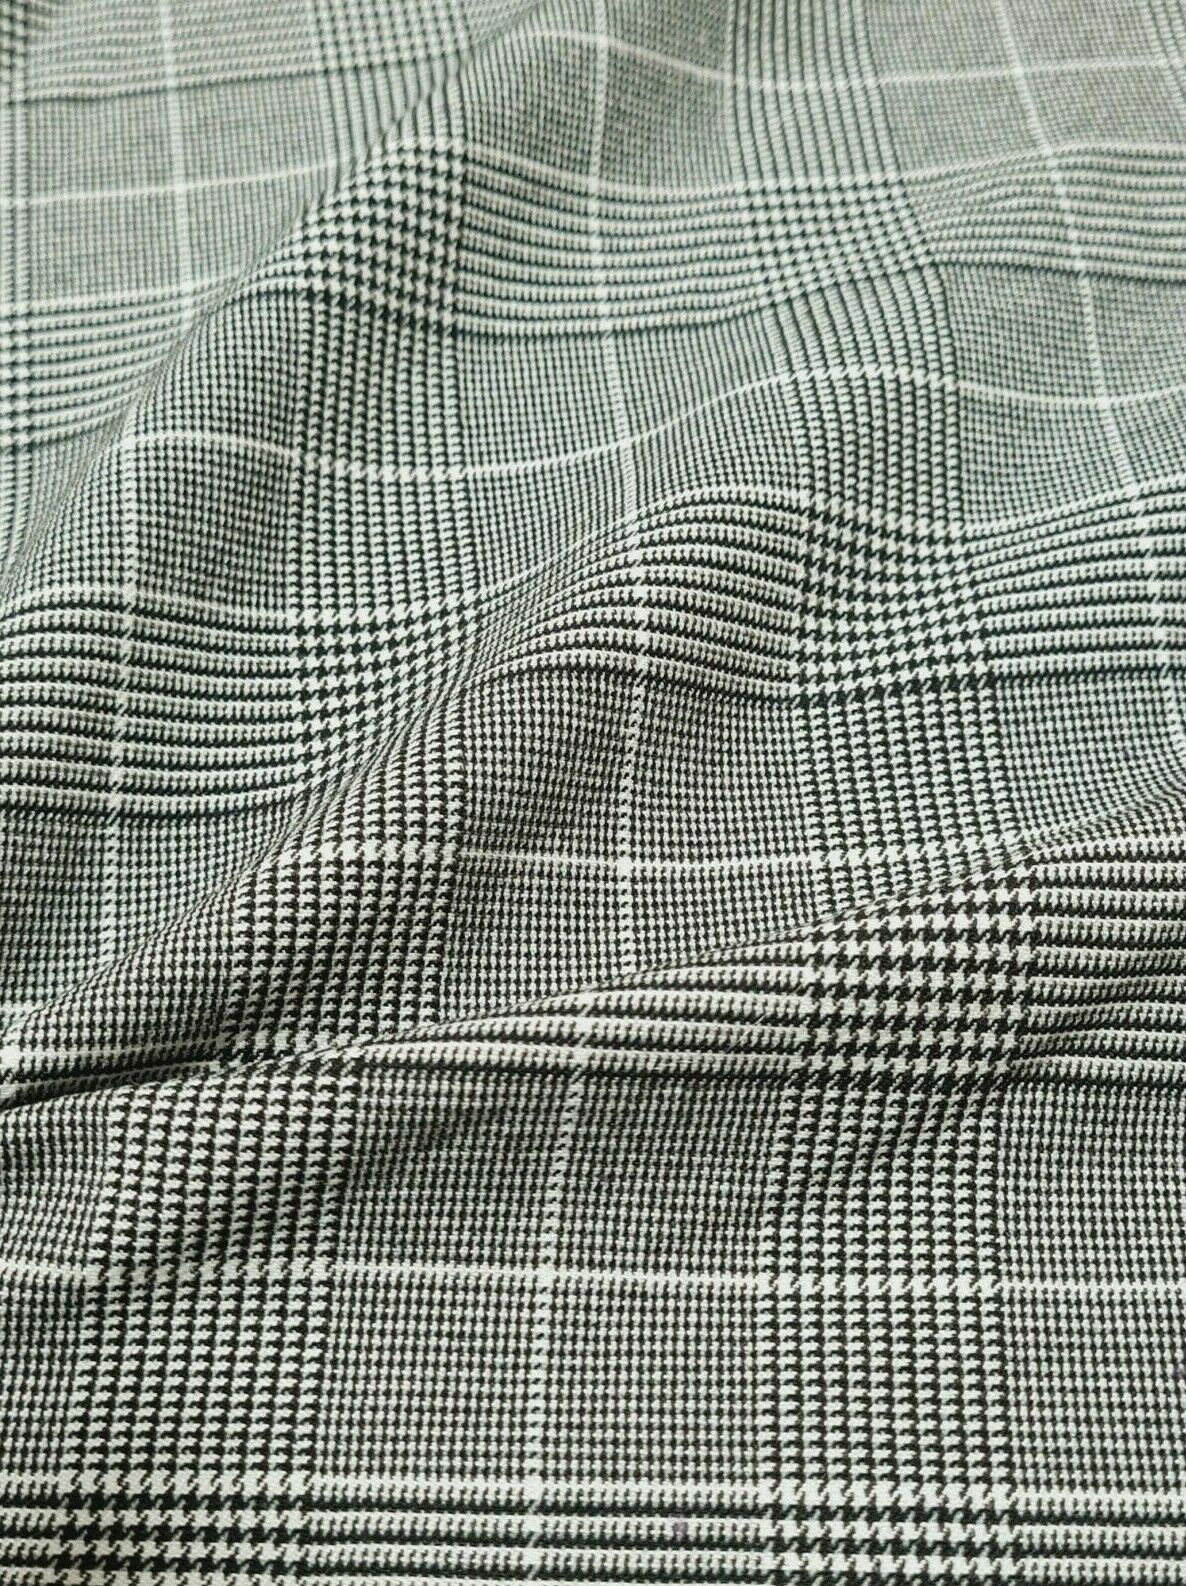 Dressmaking Fabric Viscose Mix Black And White Checked 2 Way Stretch 55" Wide